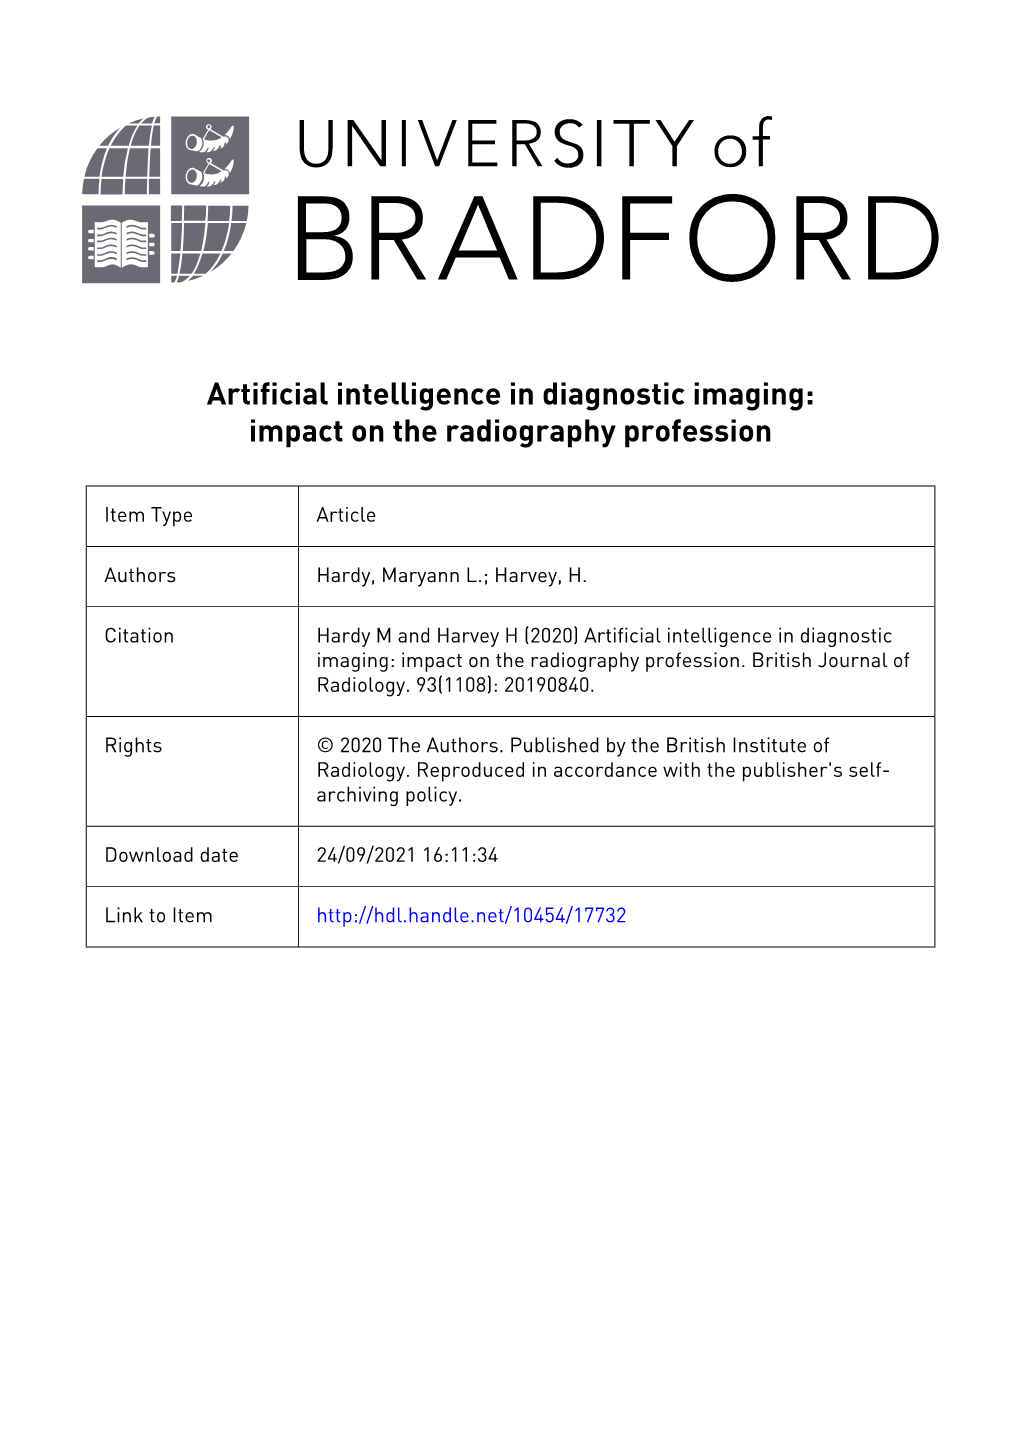 Artificial Intelligence in Diagnostic Imaging: Impact on the Radiography Profession